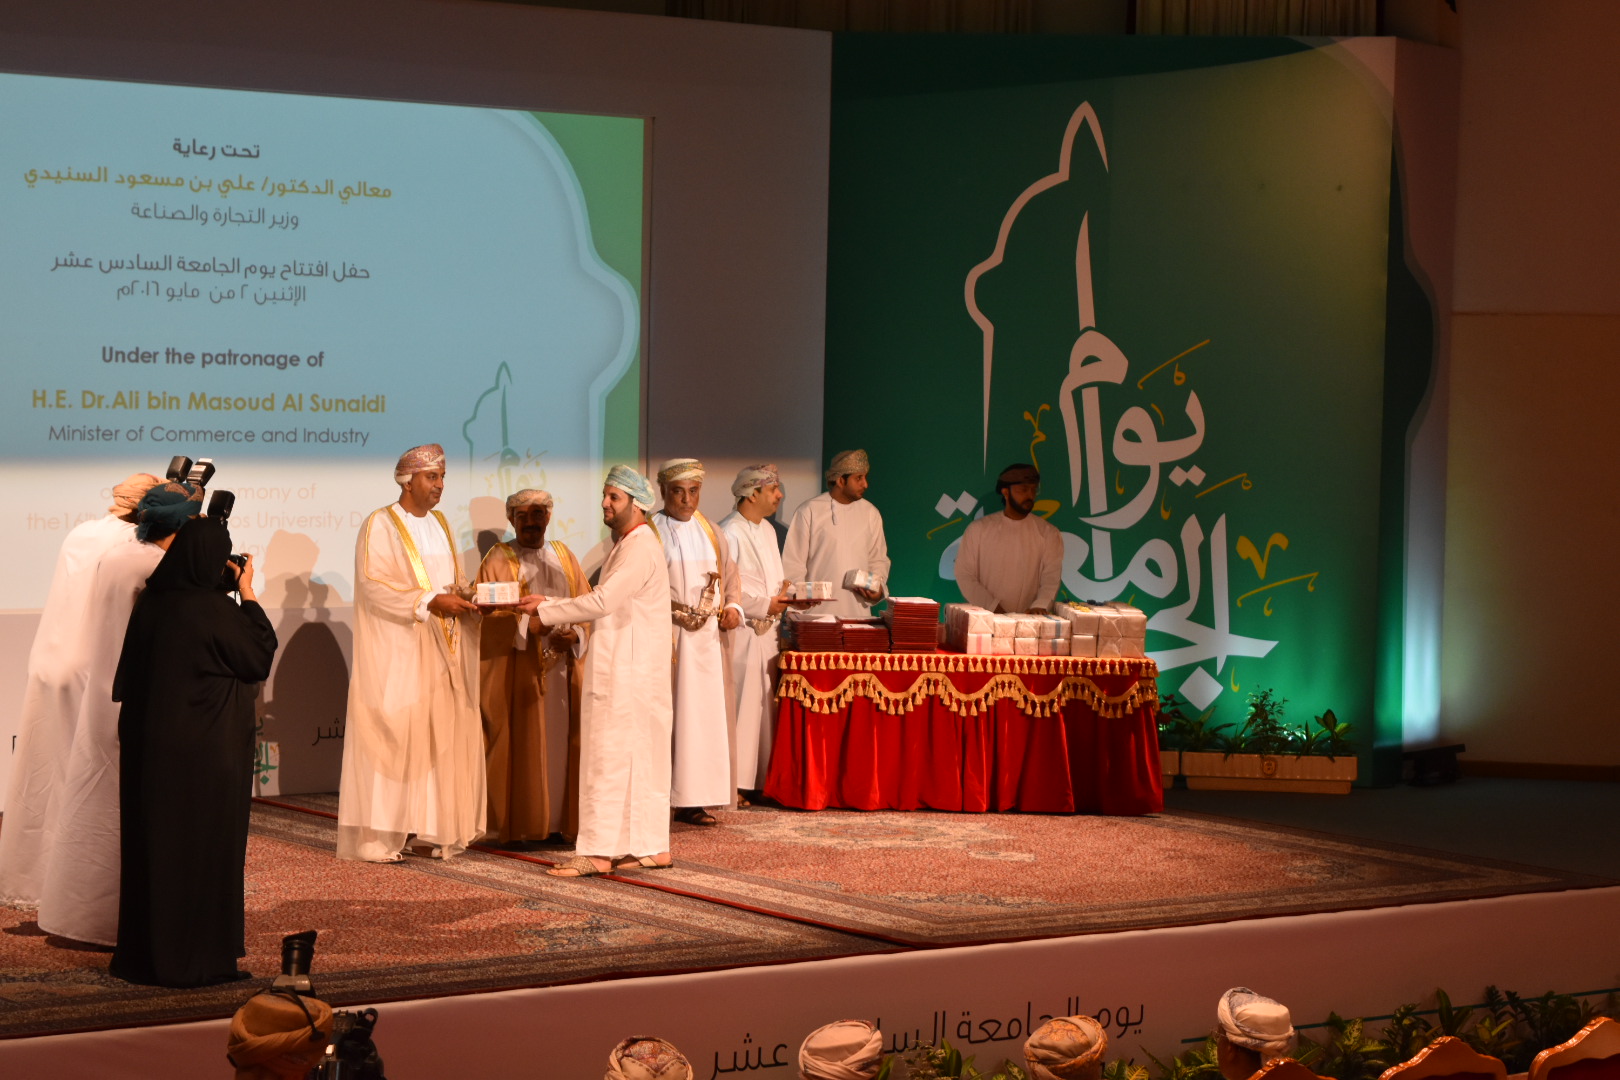 Oman education: Five researchers from SQU receive grant from His Majesty Trust Fund